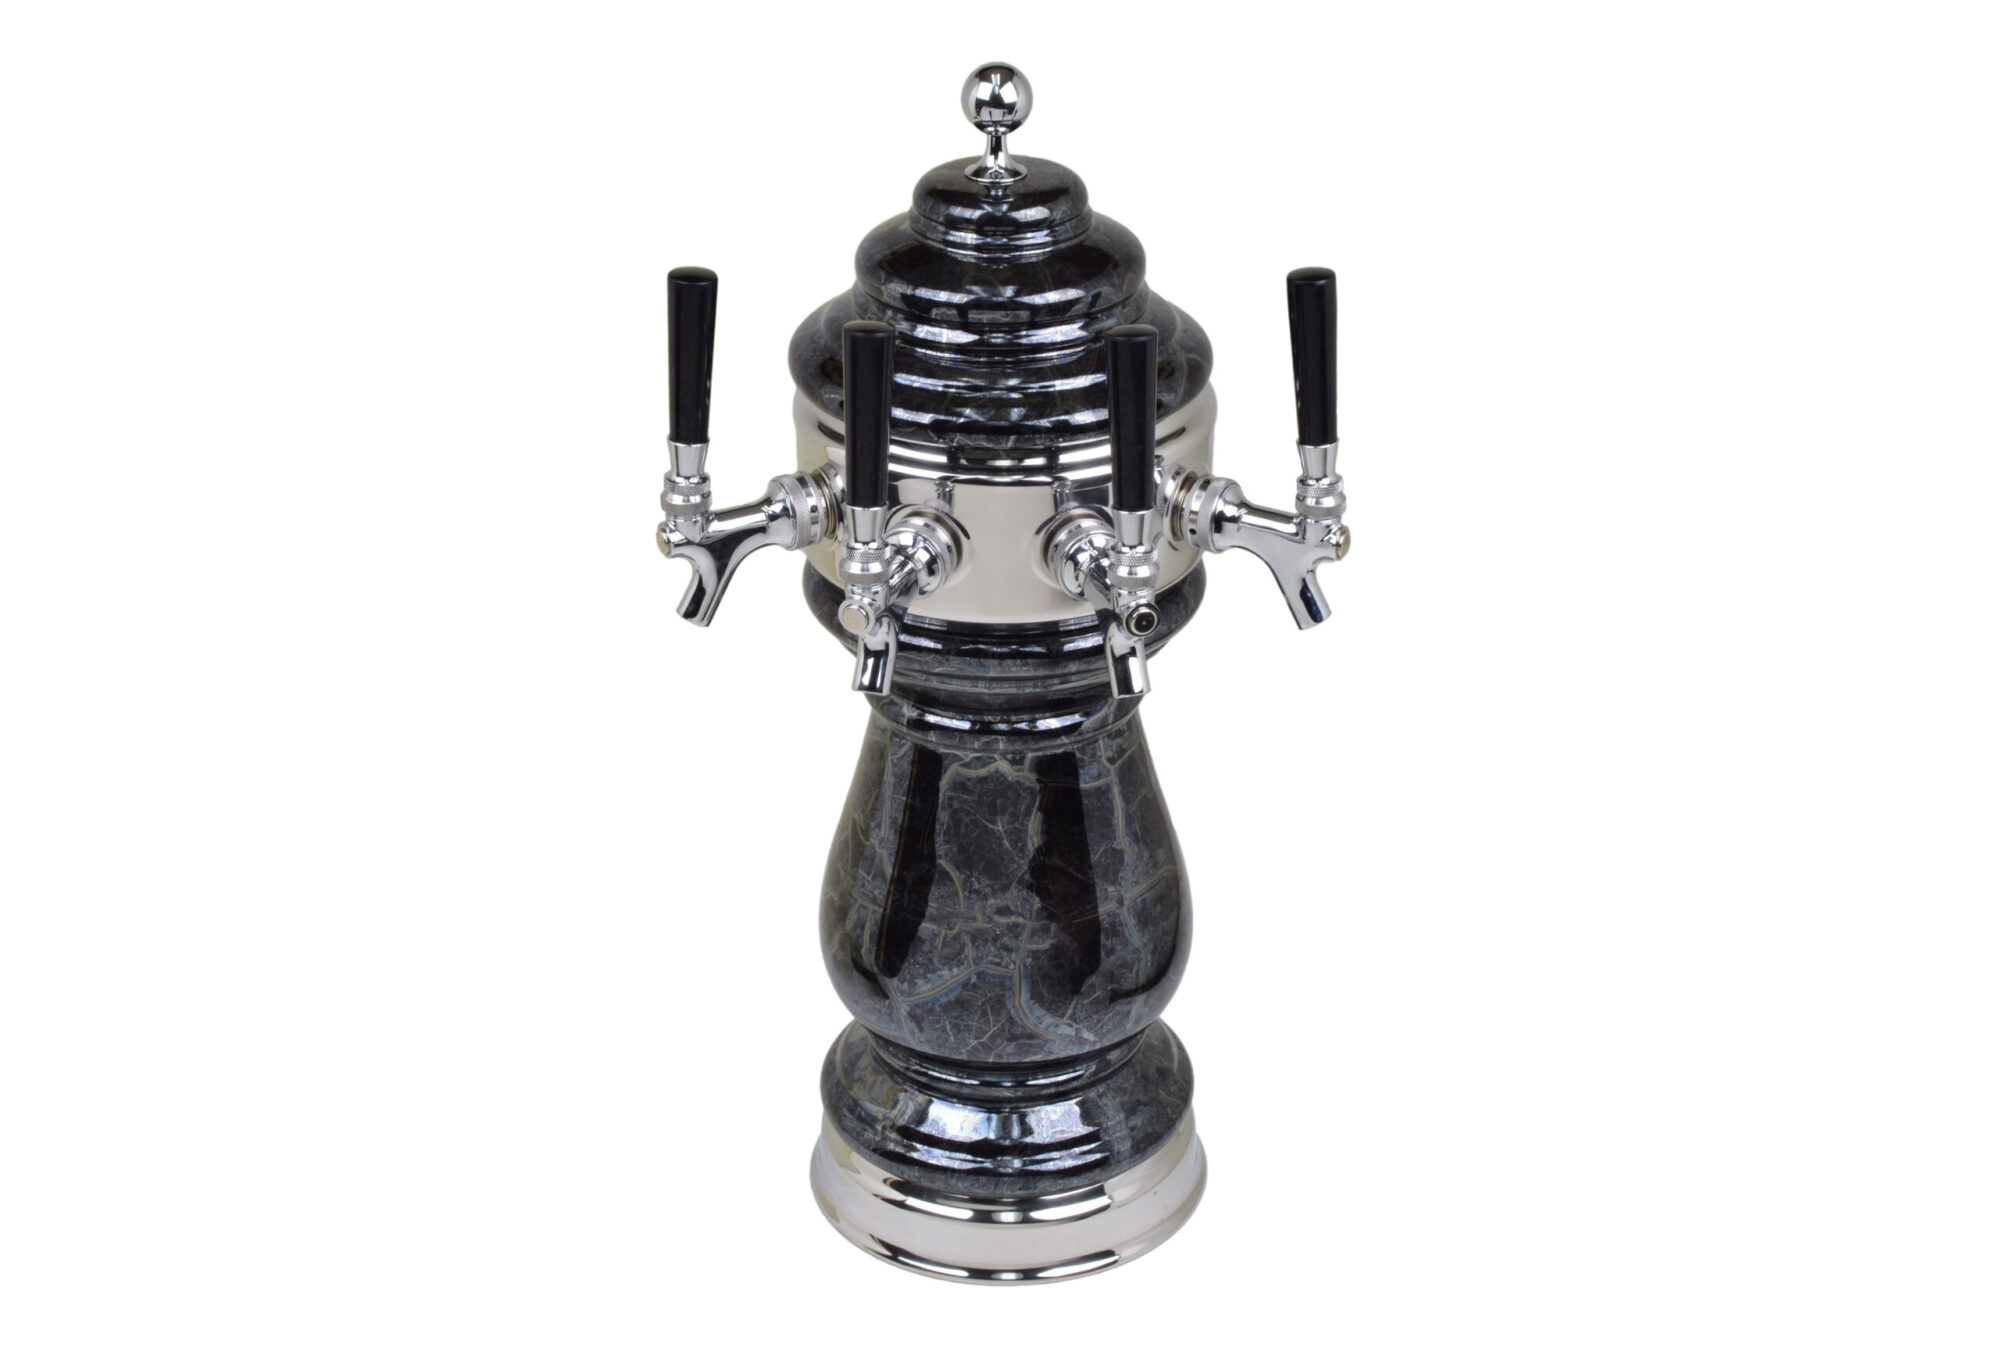 882C-4 -- Four Faucet Ceramic Tower with Chrome Plated Hardware - Available in 5 Colors - Shown in Black Marble